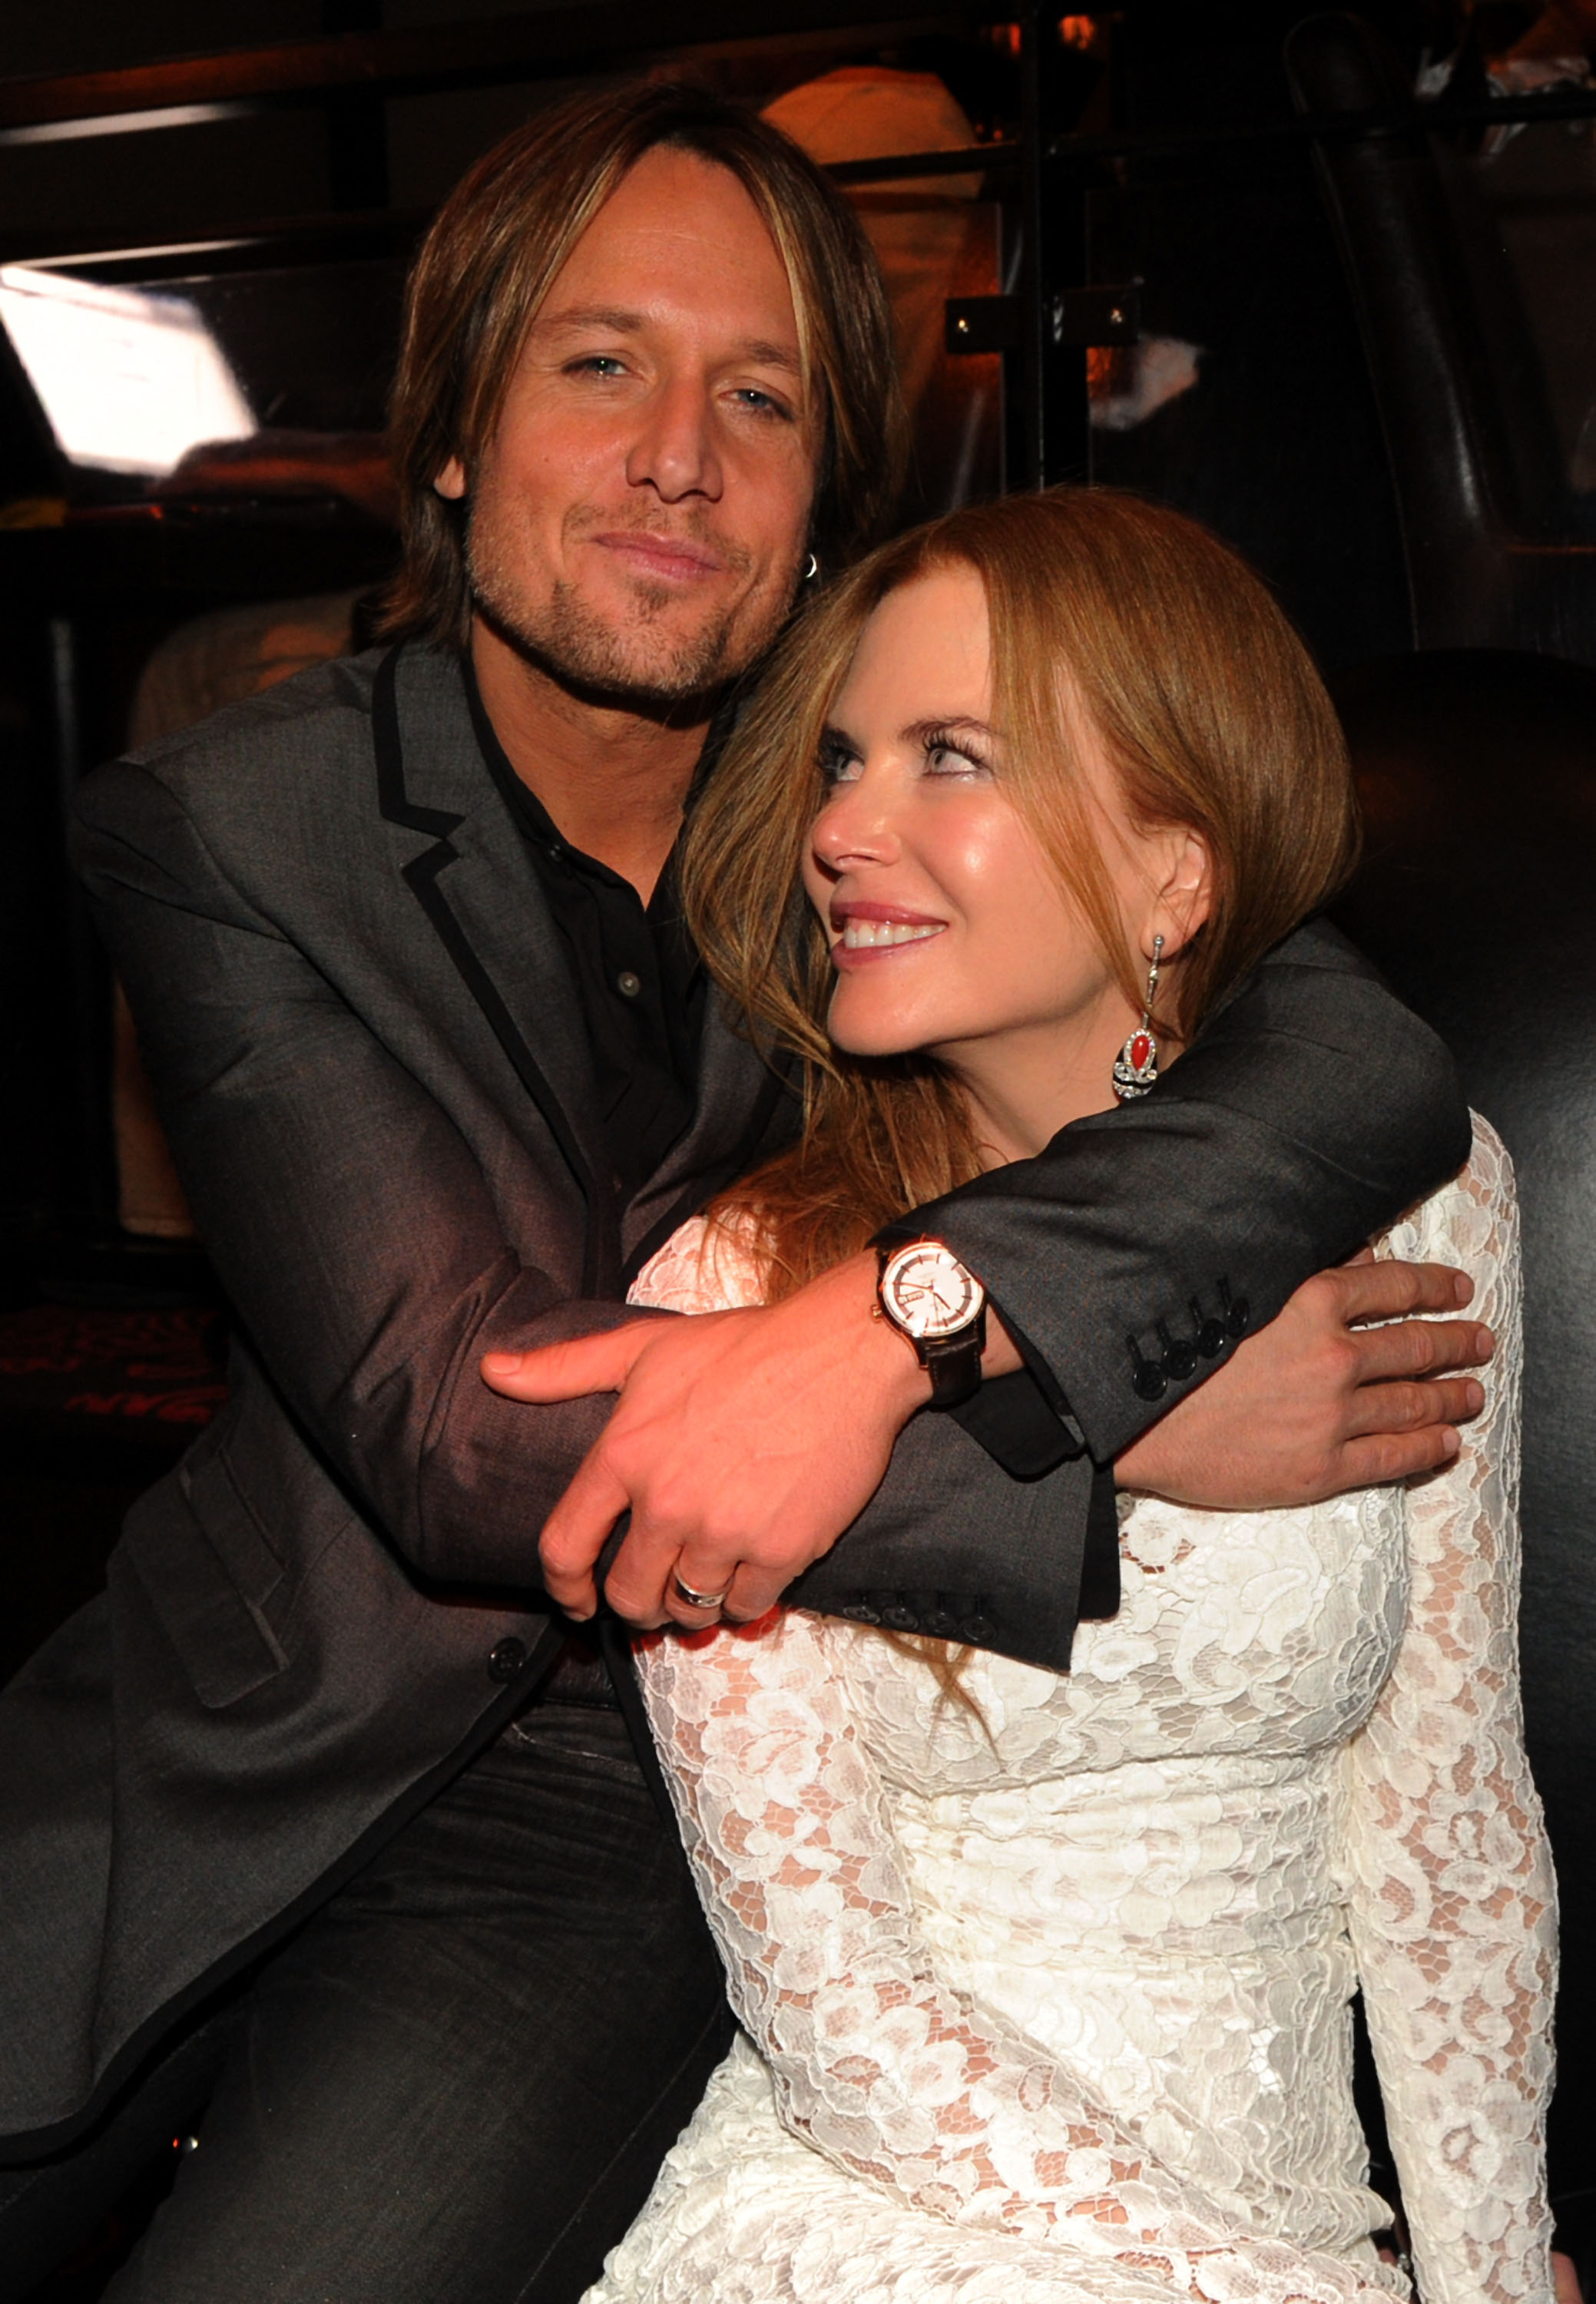 Keith Urban and Nicole Kidman attend the Capitol Records Party following the 44th Annual CMA Awards in Nashville, Tennessee, on November 10, 2010. | Source: Getty Images